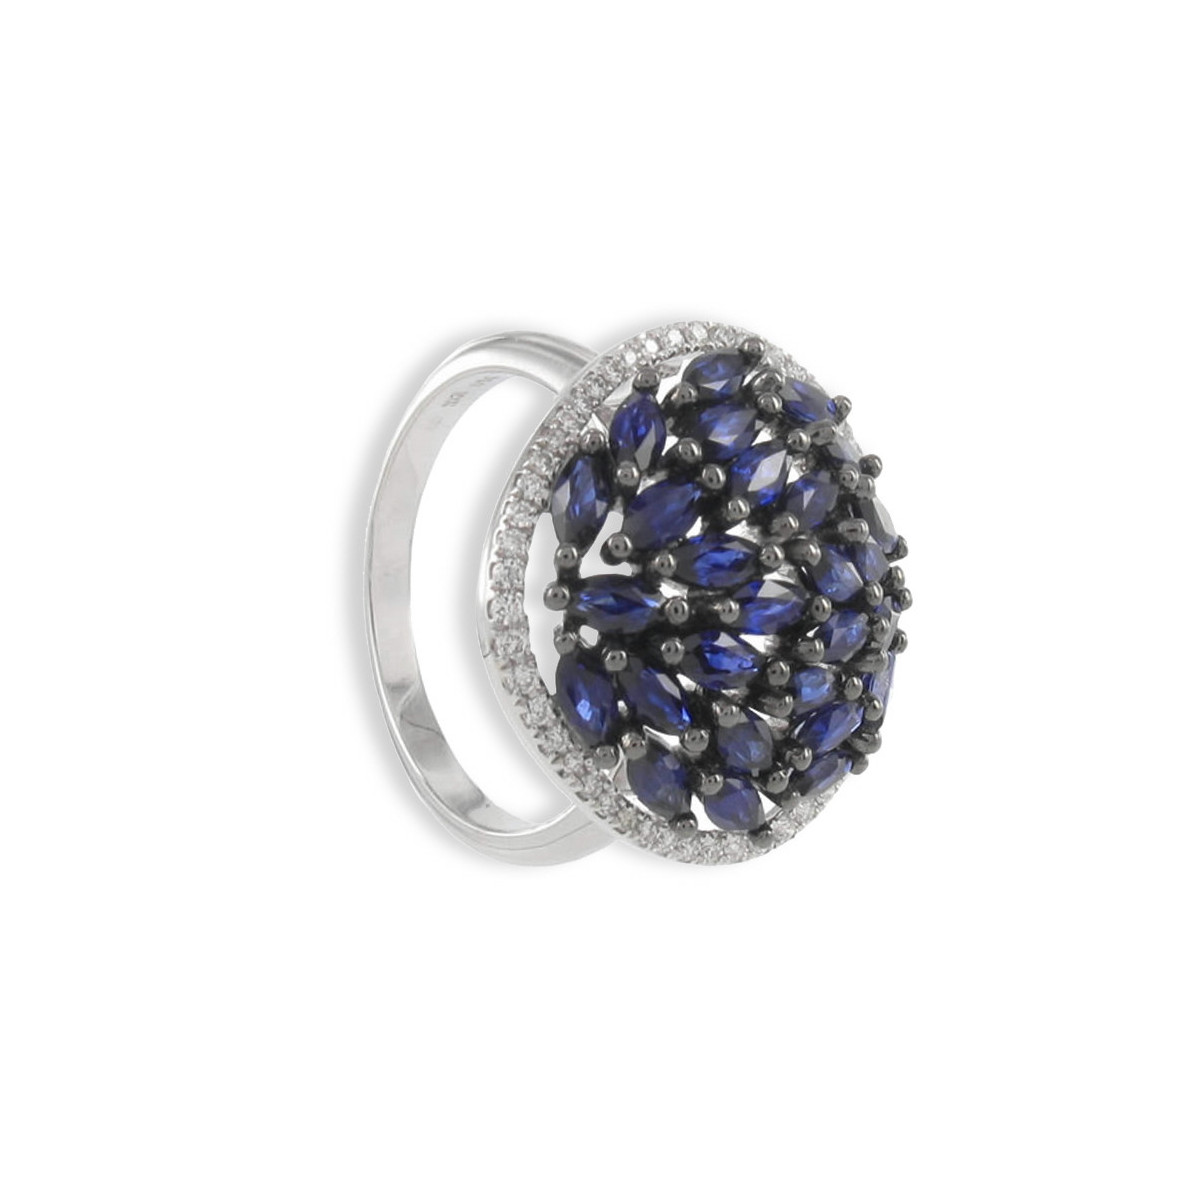 18K GOLD RING WITH 27 SAPPHIRES